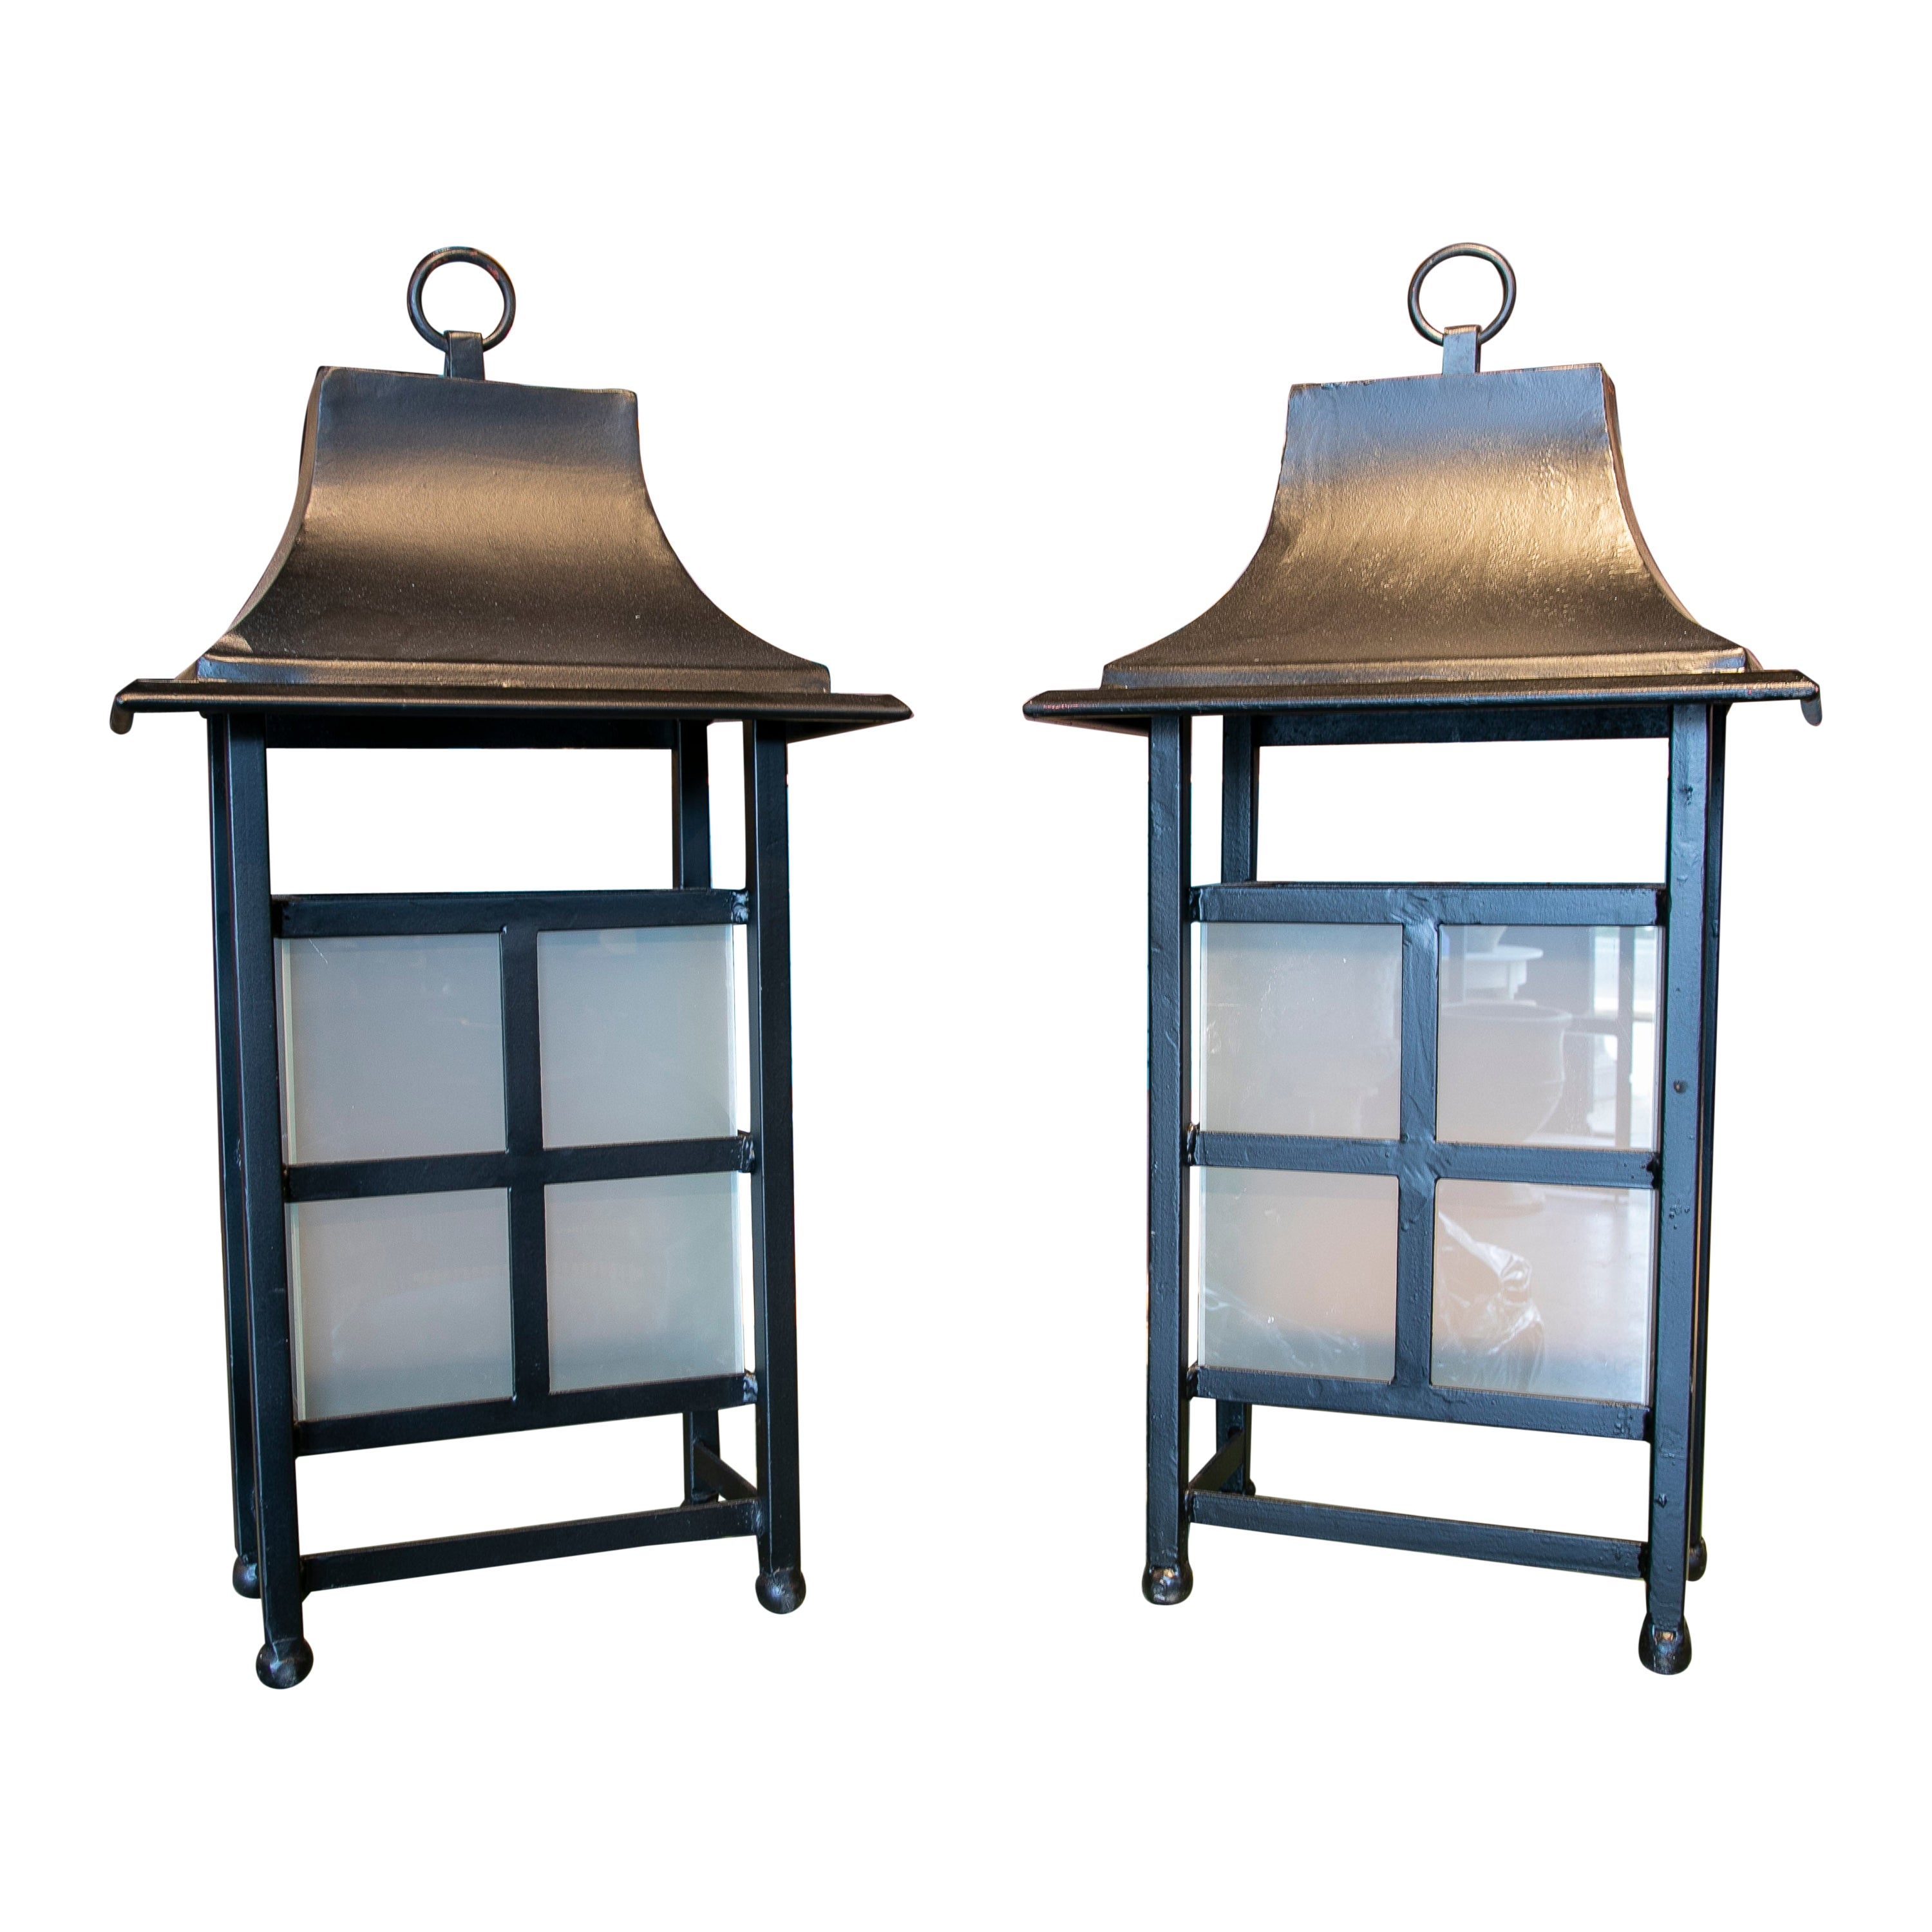 Pair of 1995 Spanish Black Iron Wall Lamp Lanterns w/ Glass Panels For Sale